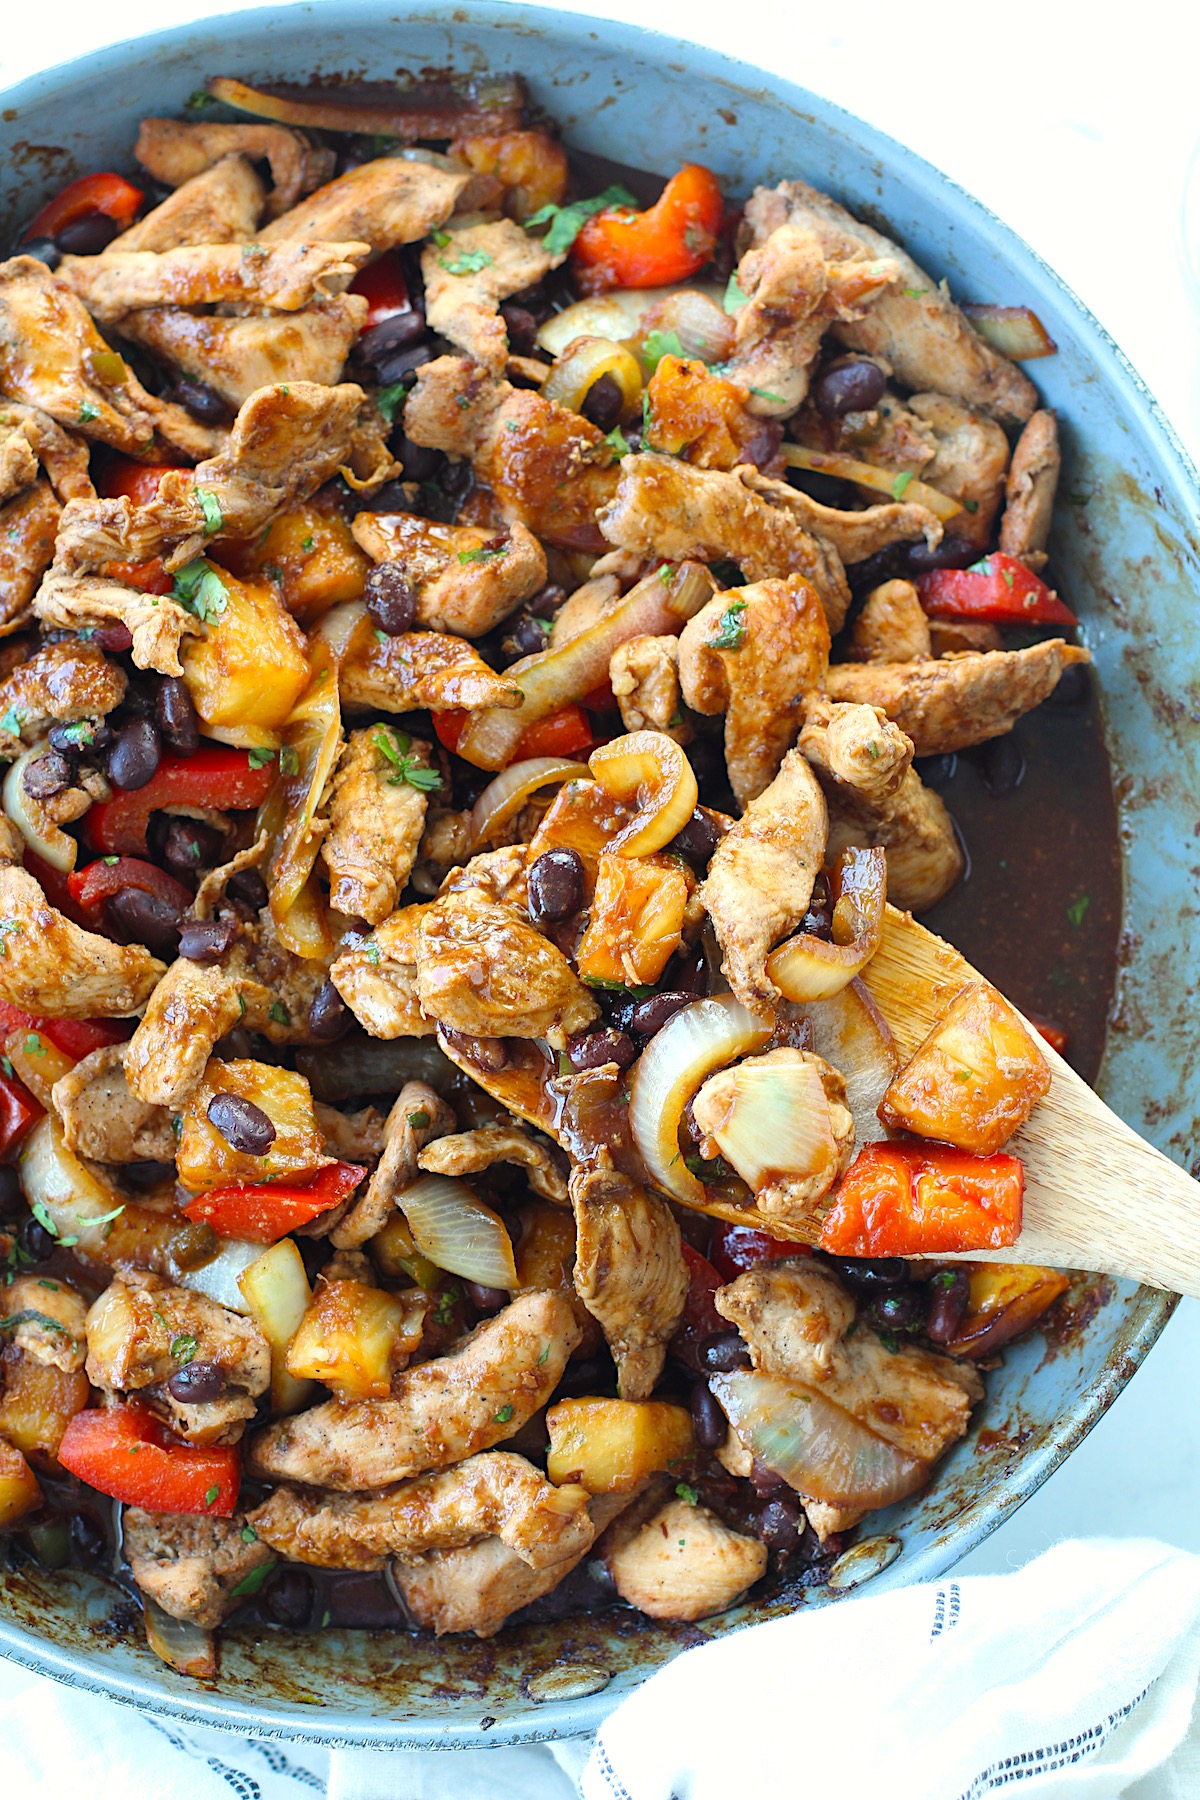 Brazilian Marinated Chicken Stir Fry with pineapple, black beans, red Pepper and onions in a skillet with spatula with cilantro garnish. It is truly one amazing dish with incredible flavor!